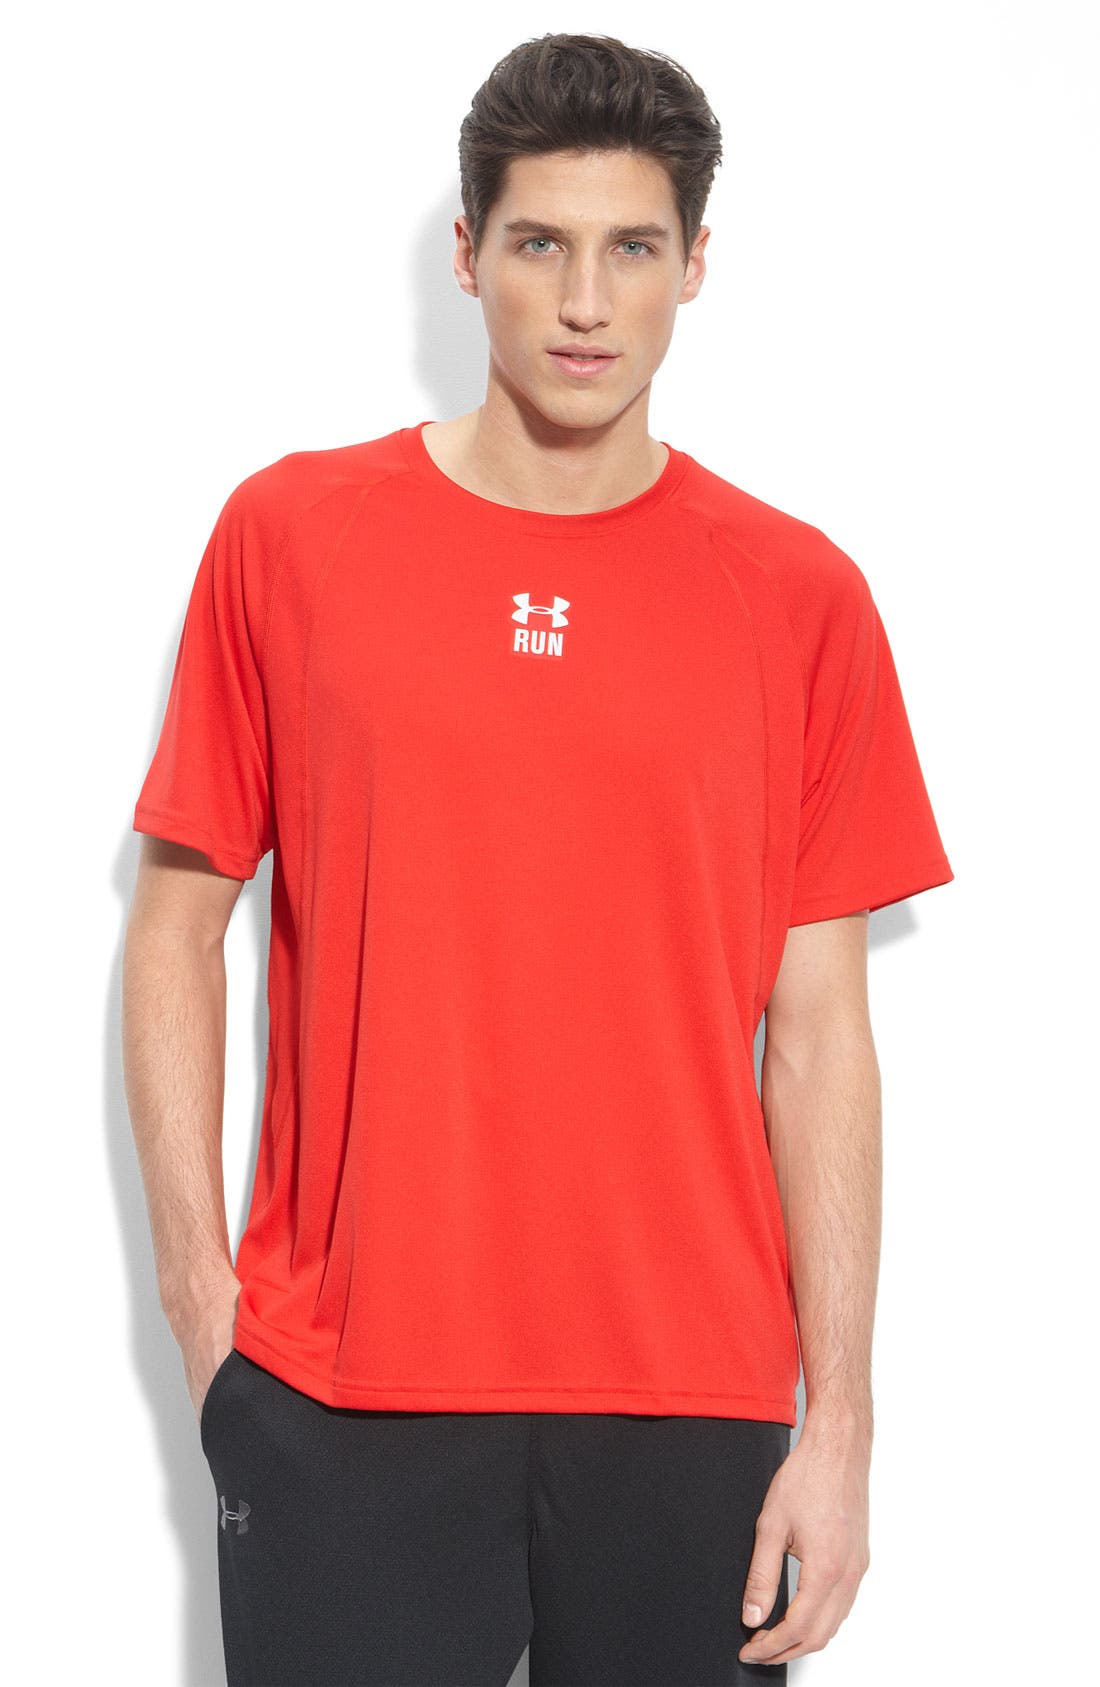 under armour uv protection shirts